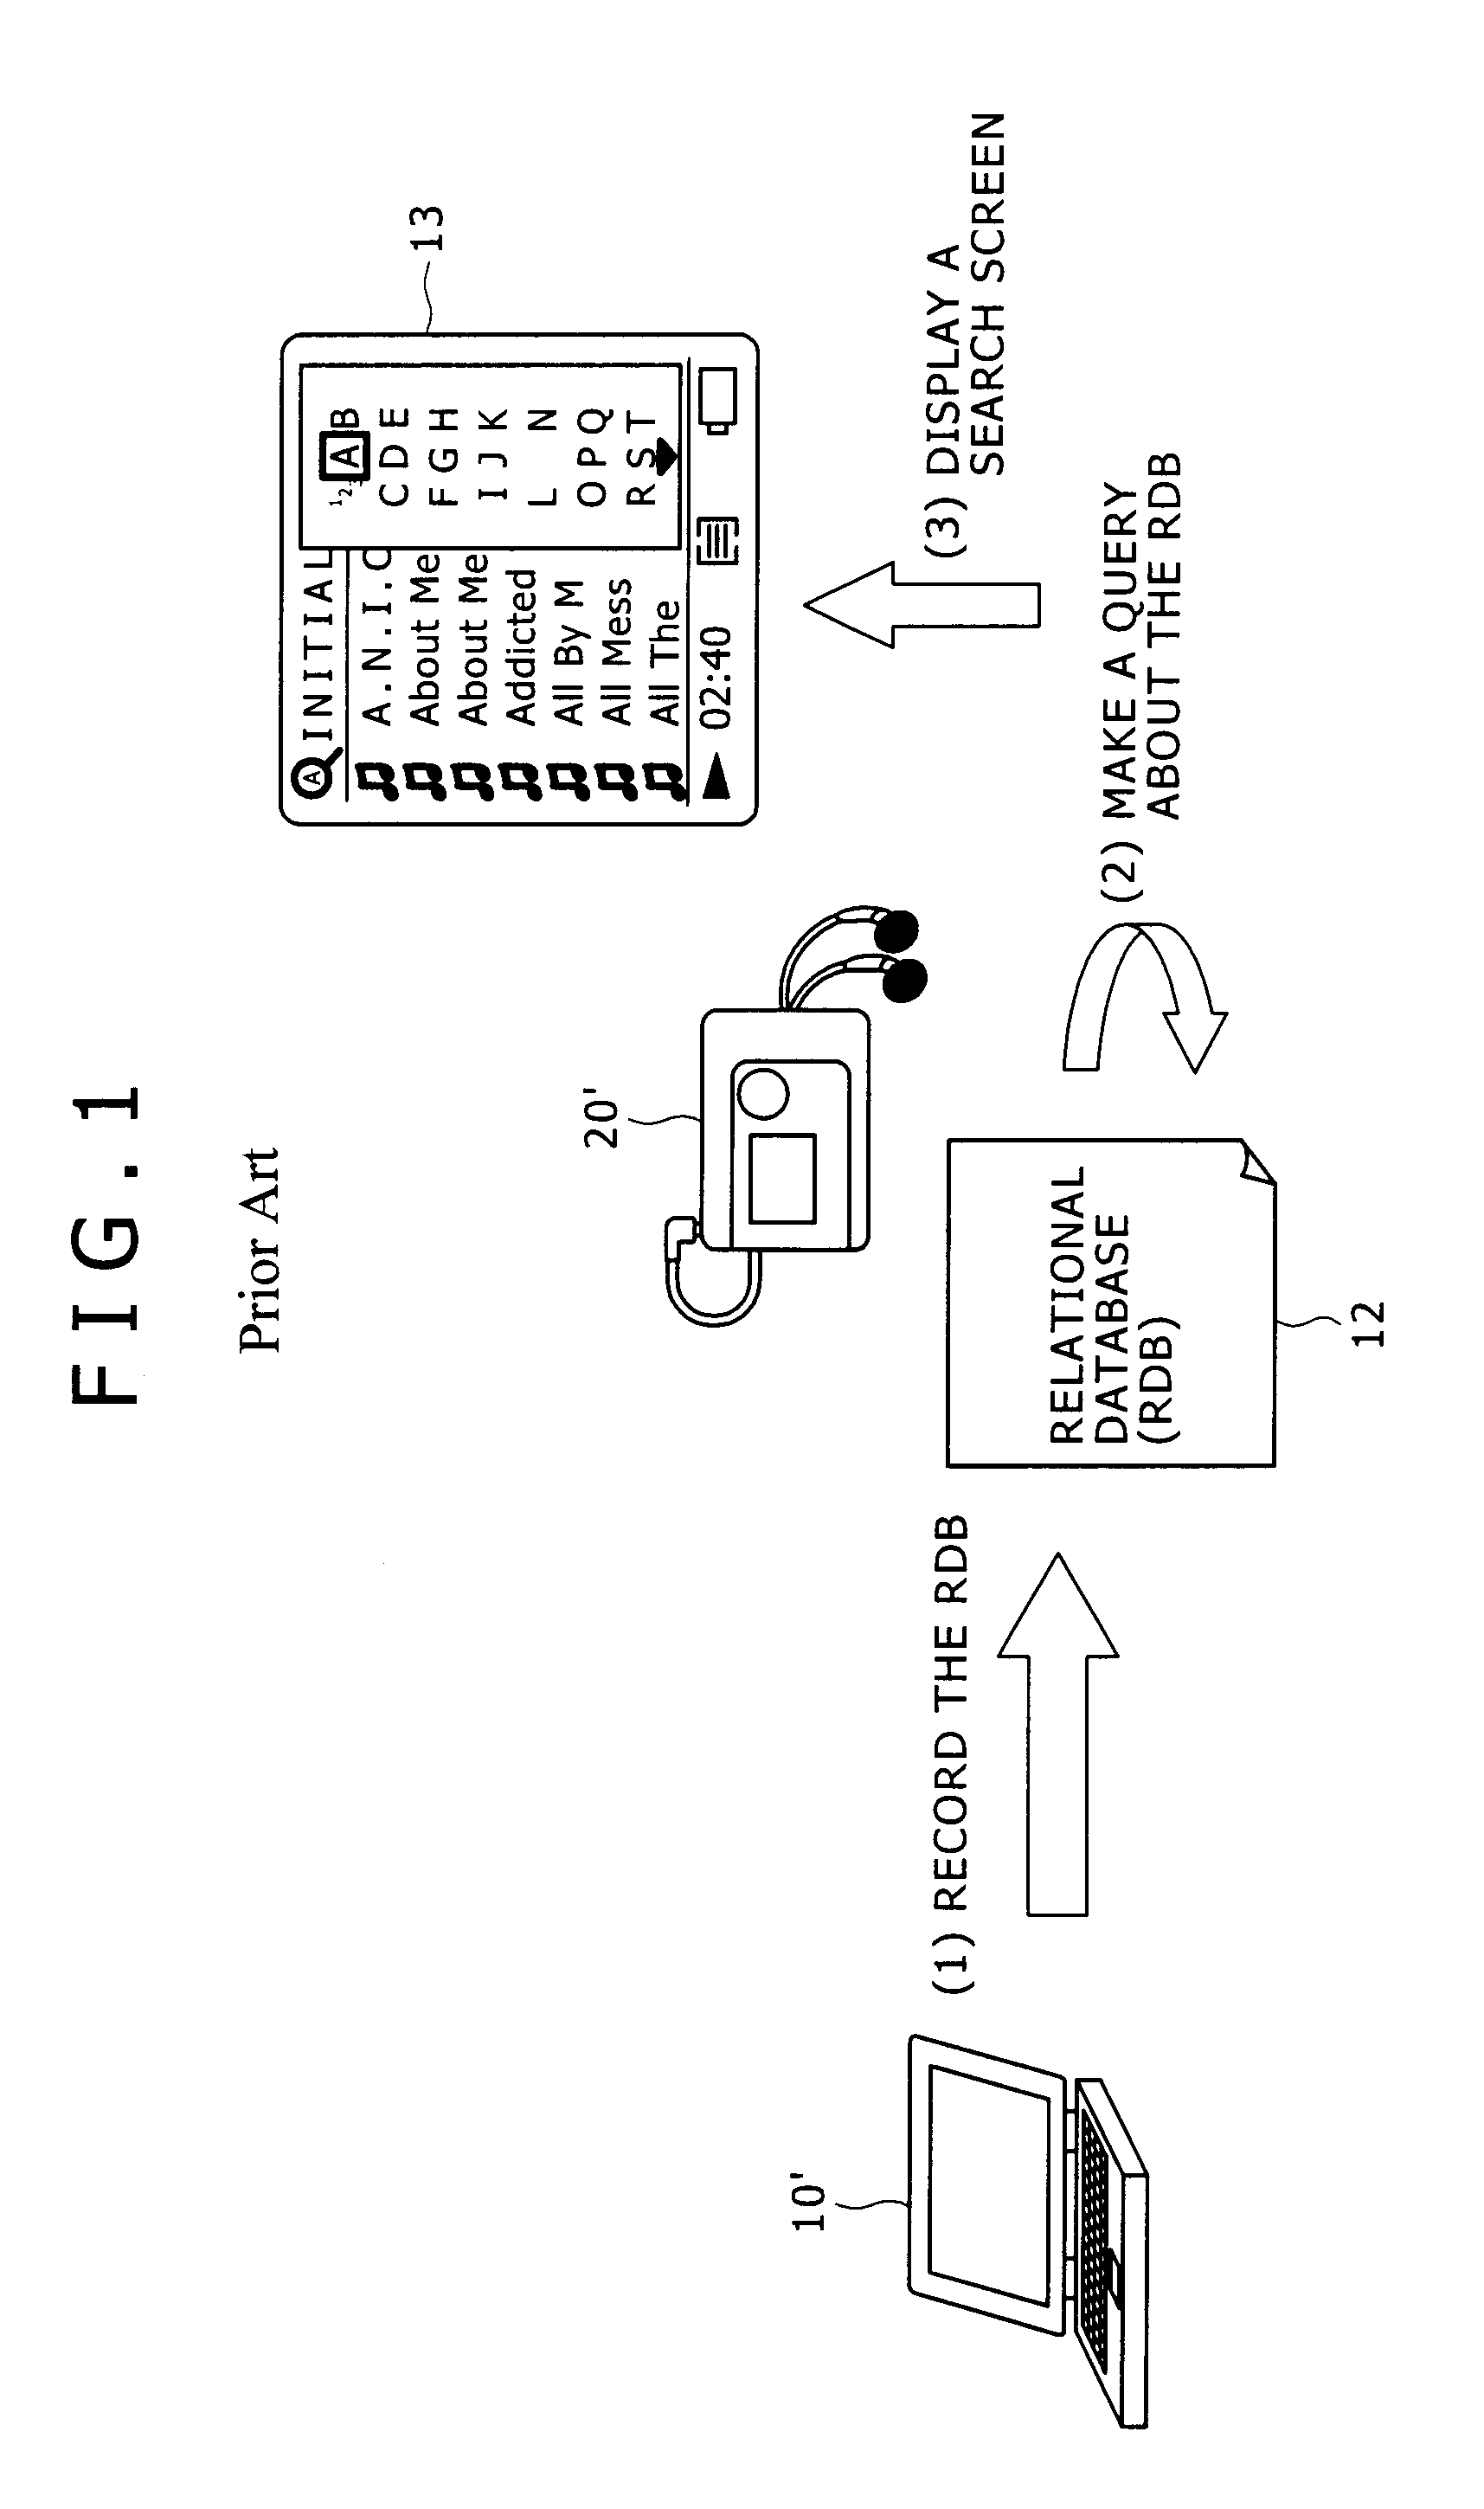 Processing apparatus and associated methodology for content table generation and transfer